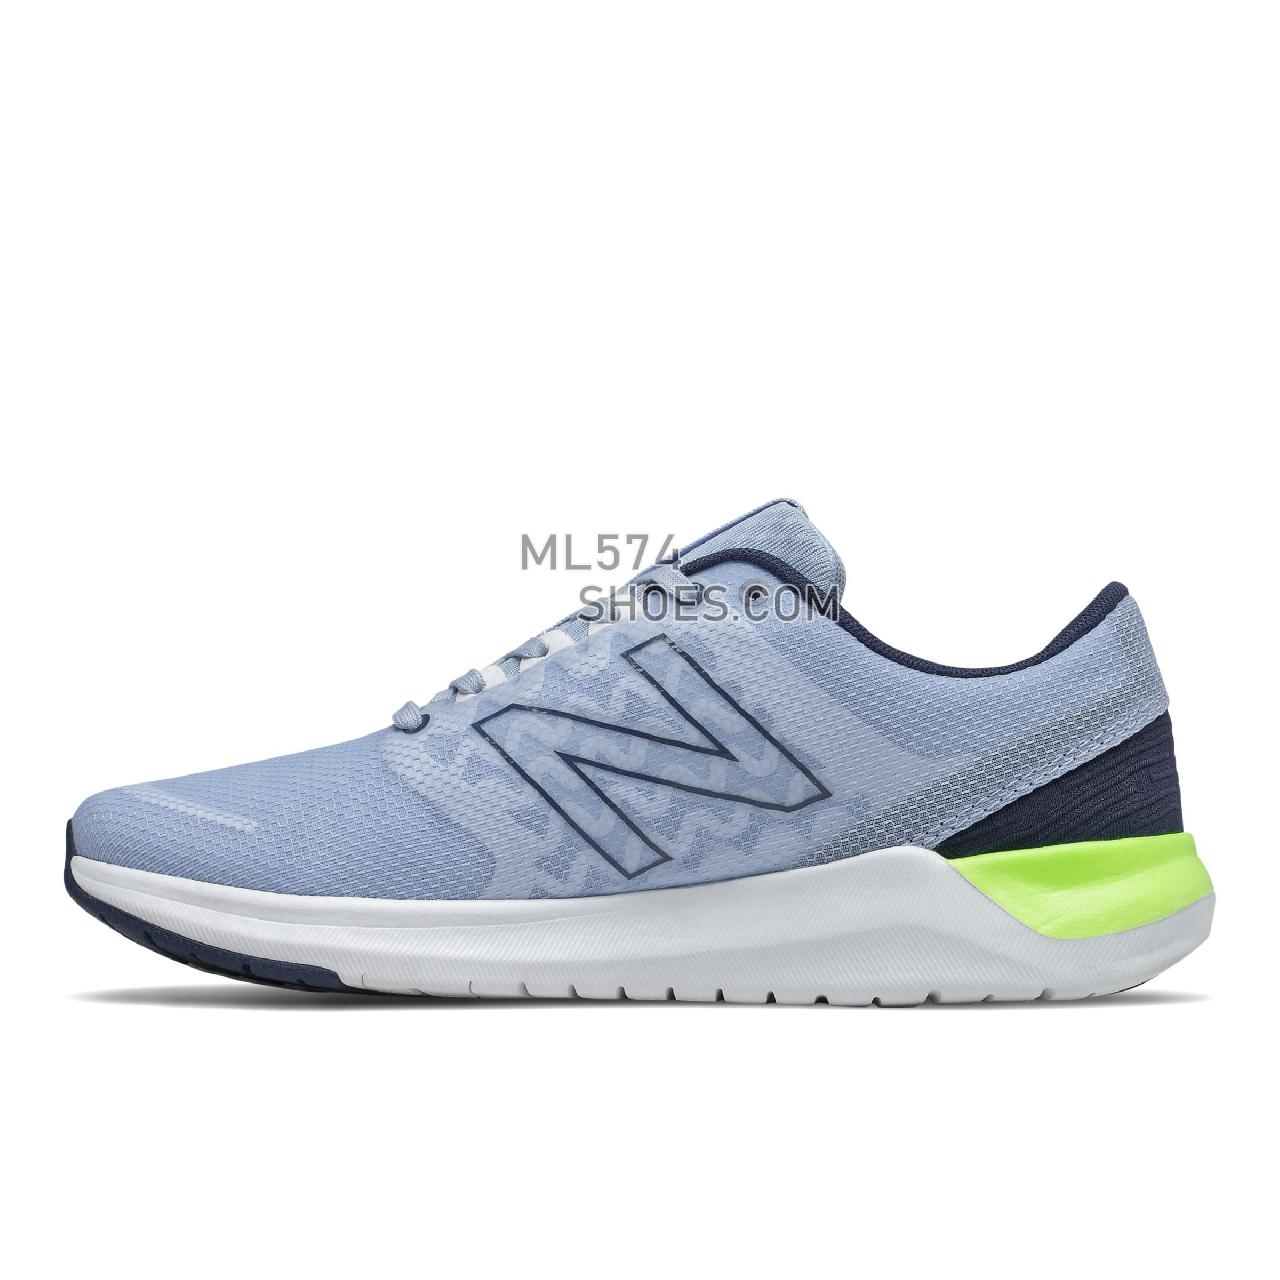 New Balance 715v4 - Women's Workout - Frost with Natural Indigo and Lime Glo - WX715CB4